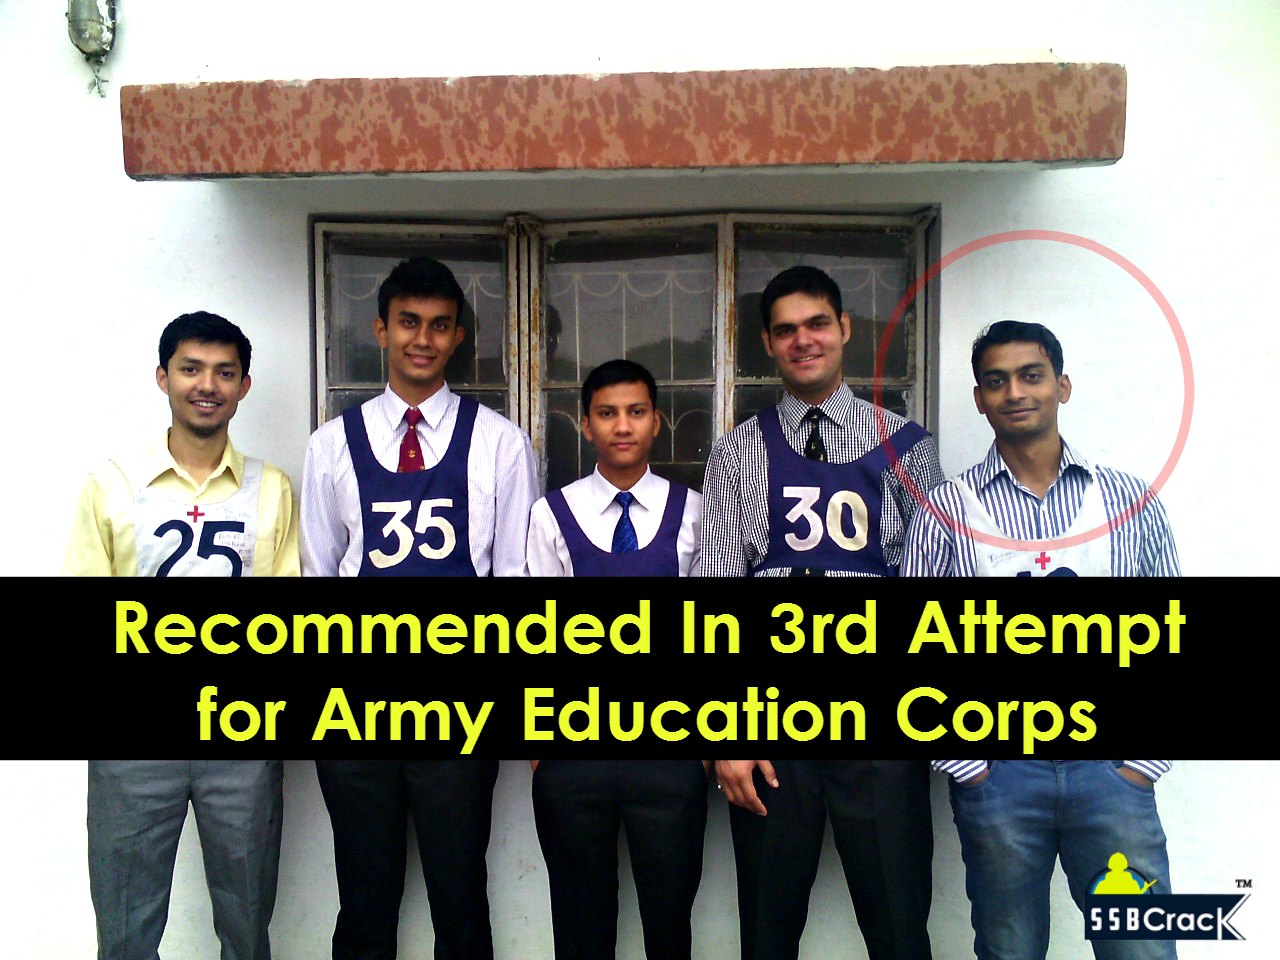 Recommended In 3rd Attempt for Army Education Corps